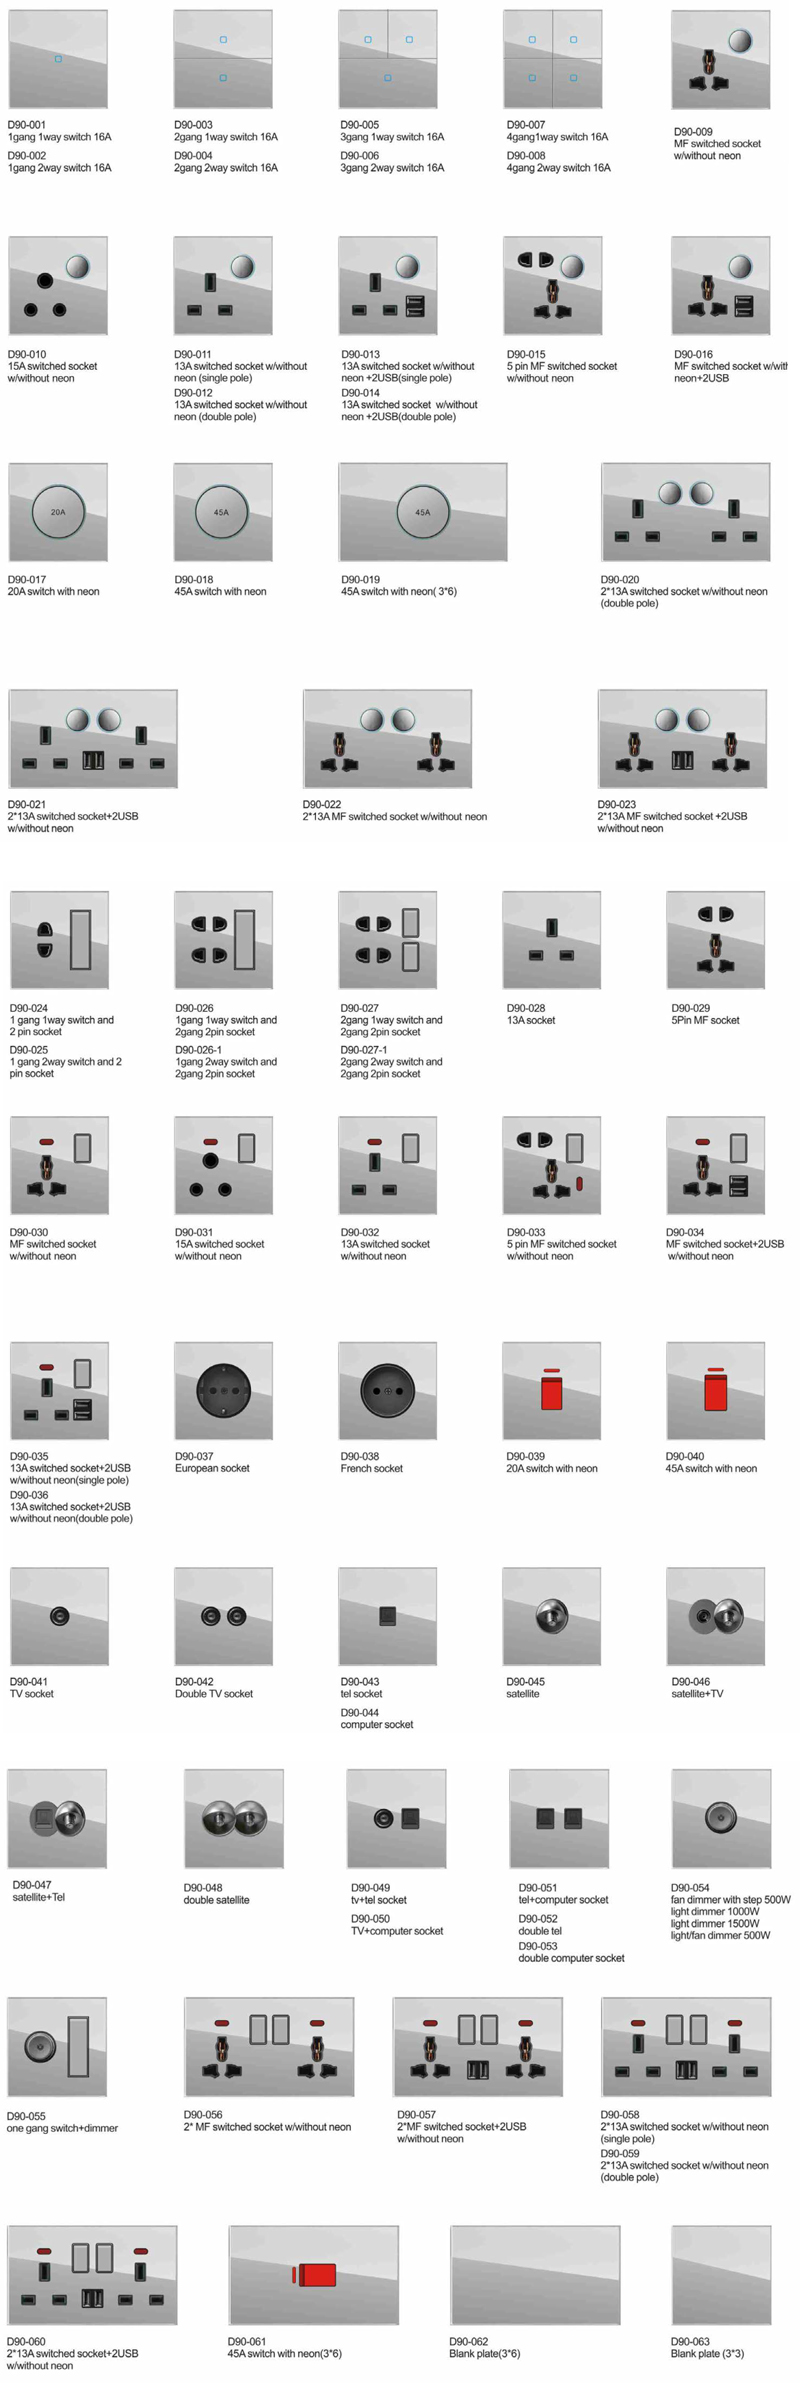 Switch at socket-a1